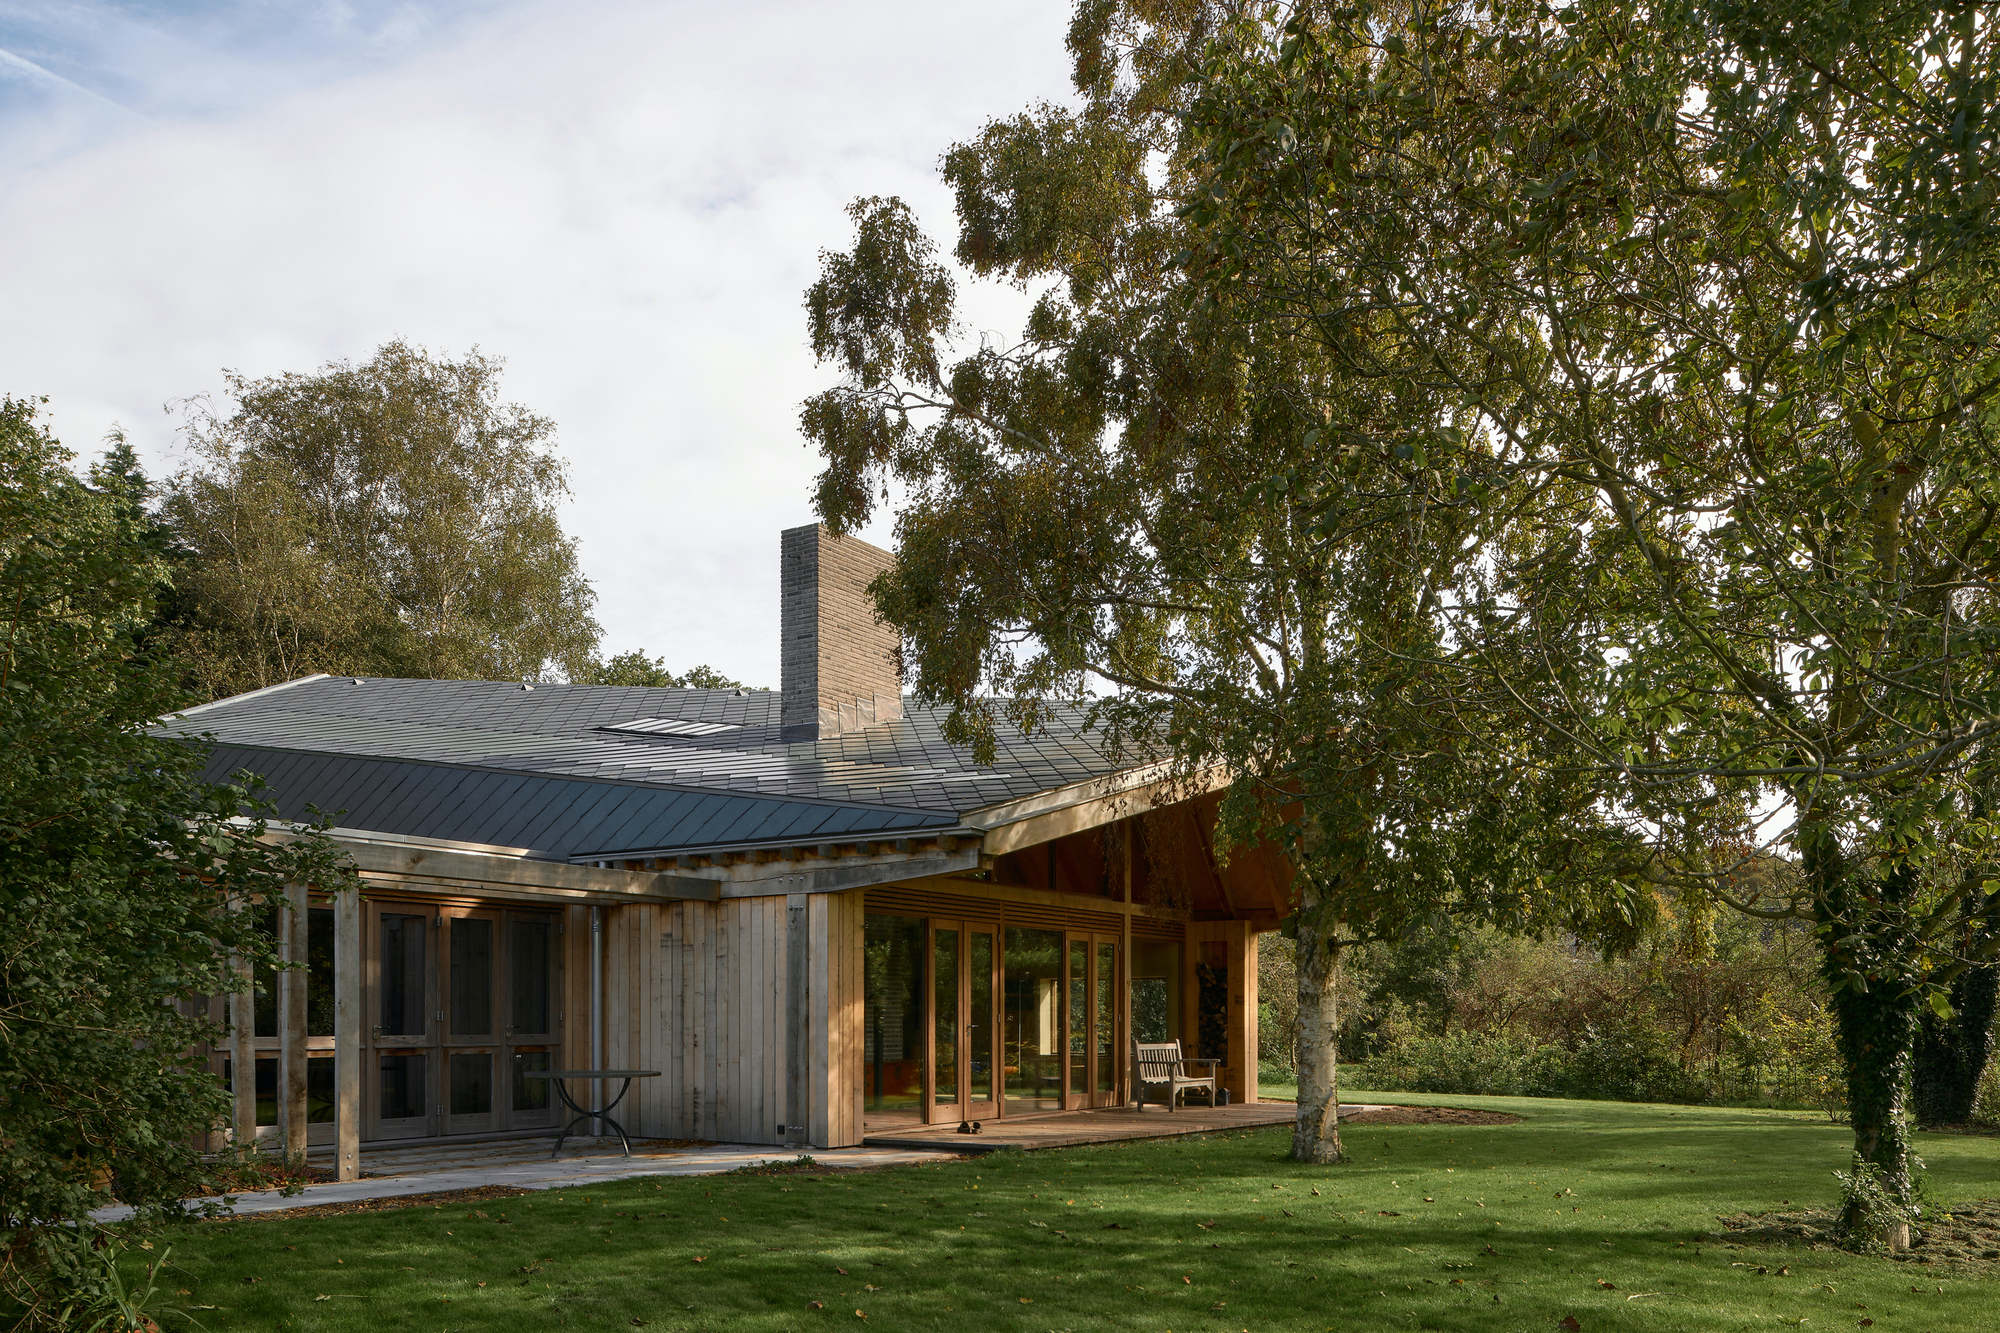 Orchard House / Earthbound architecture and Namelok